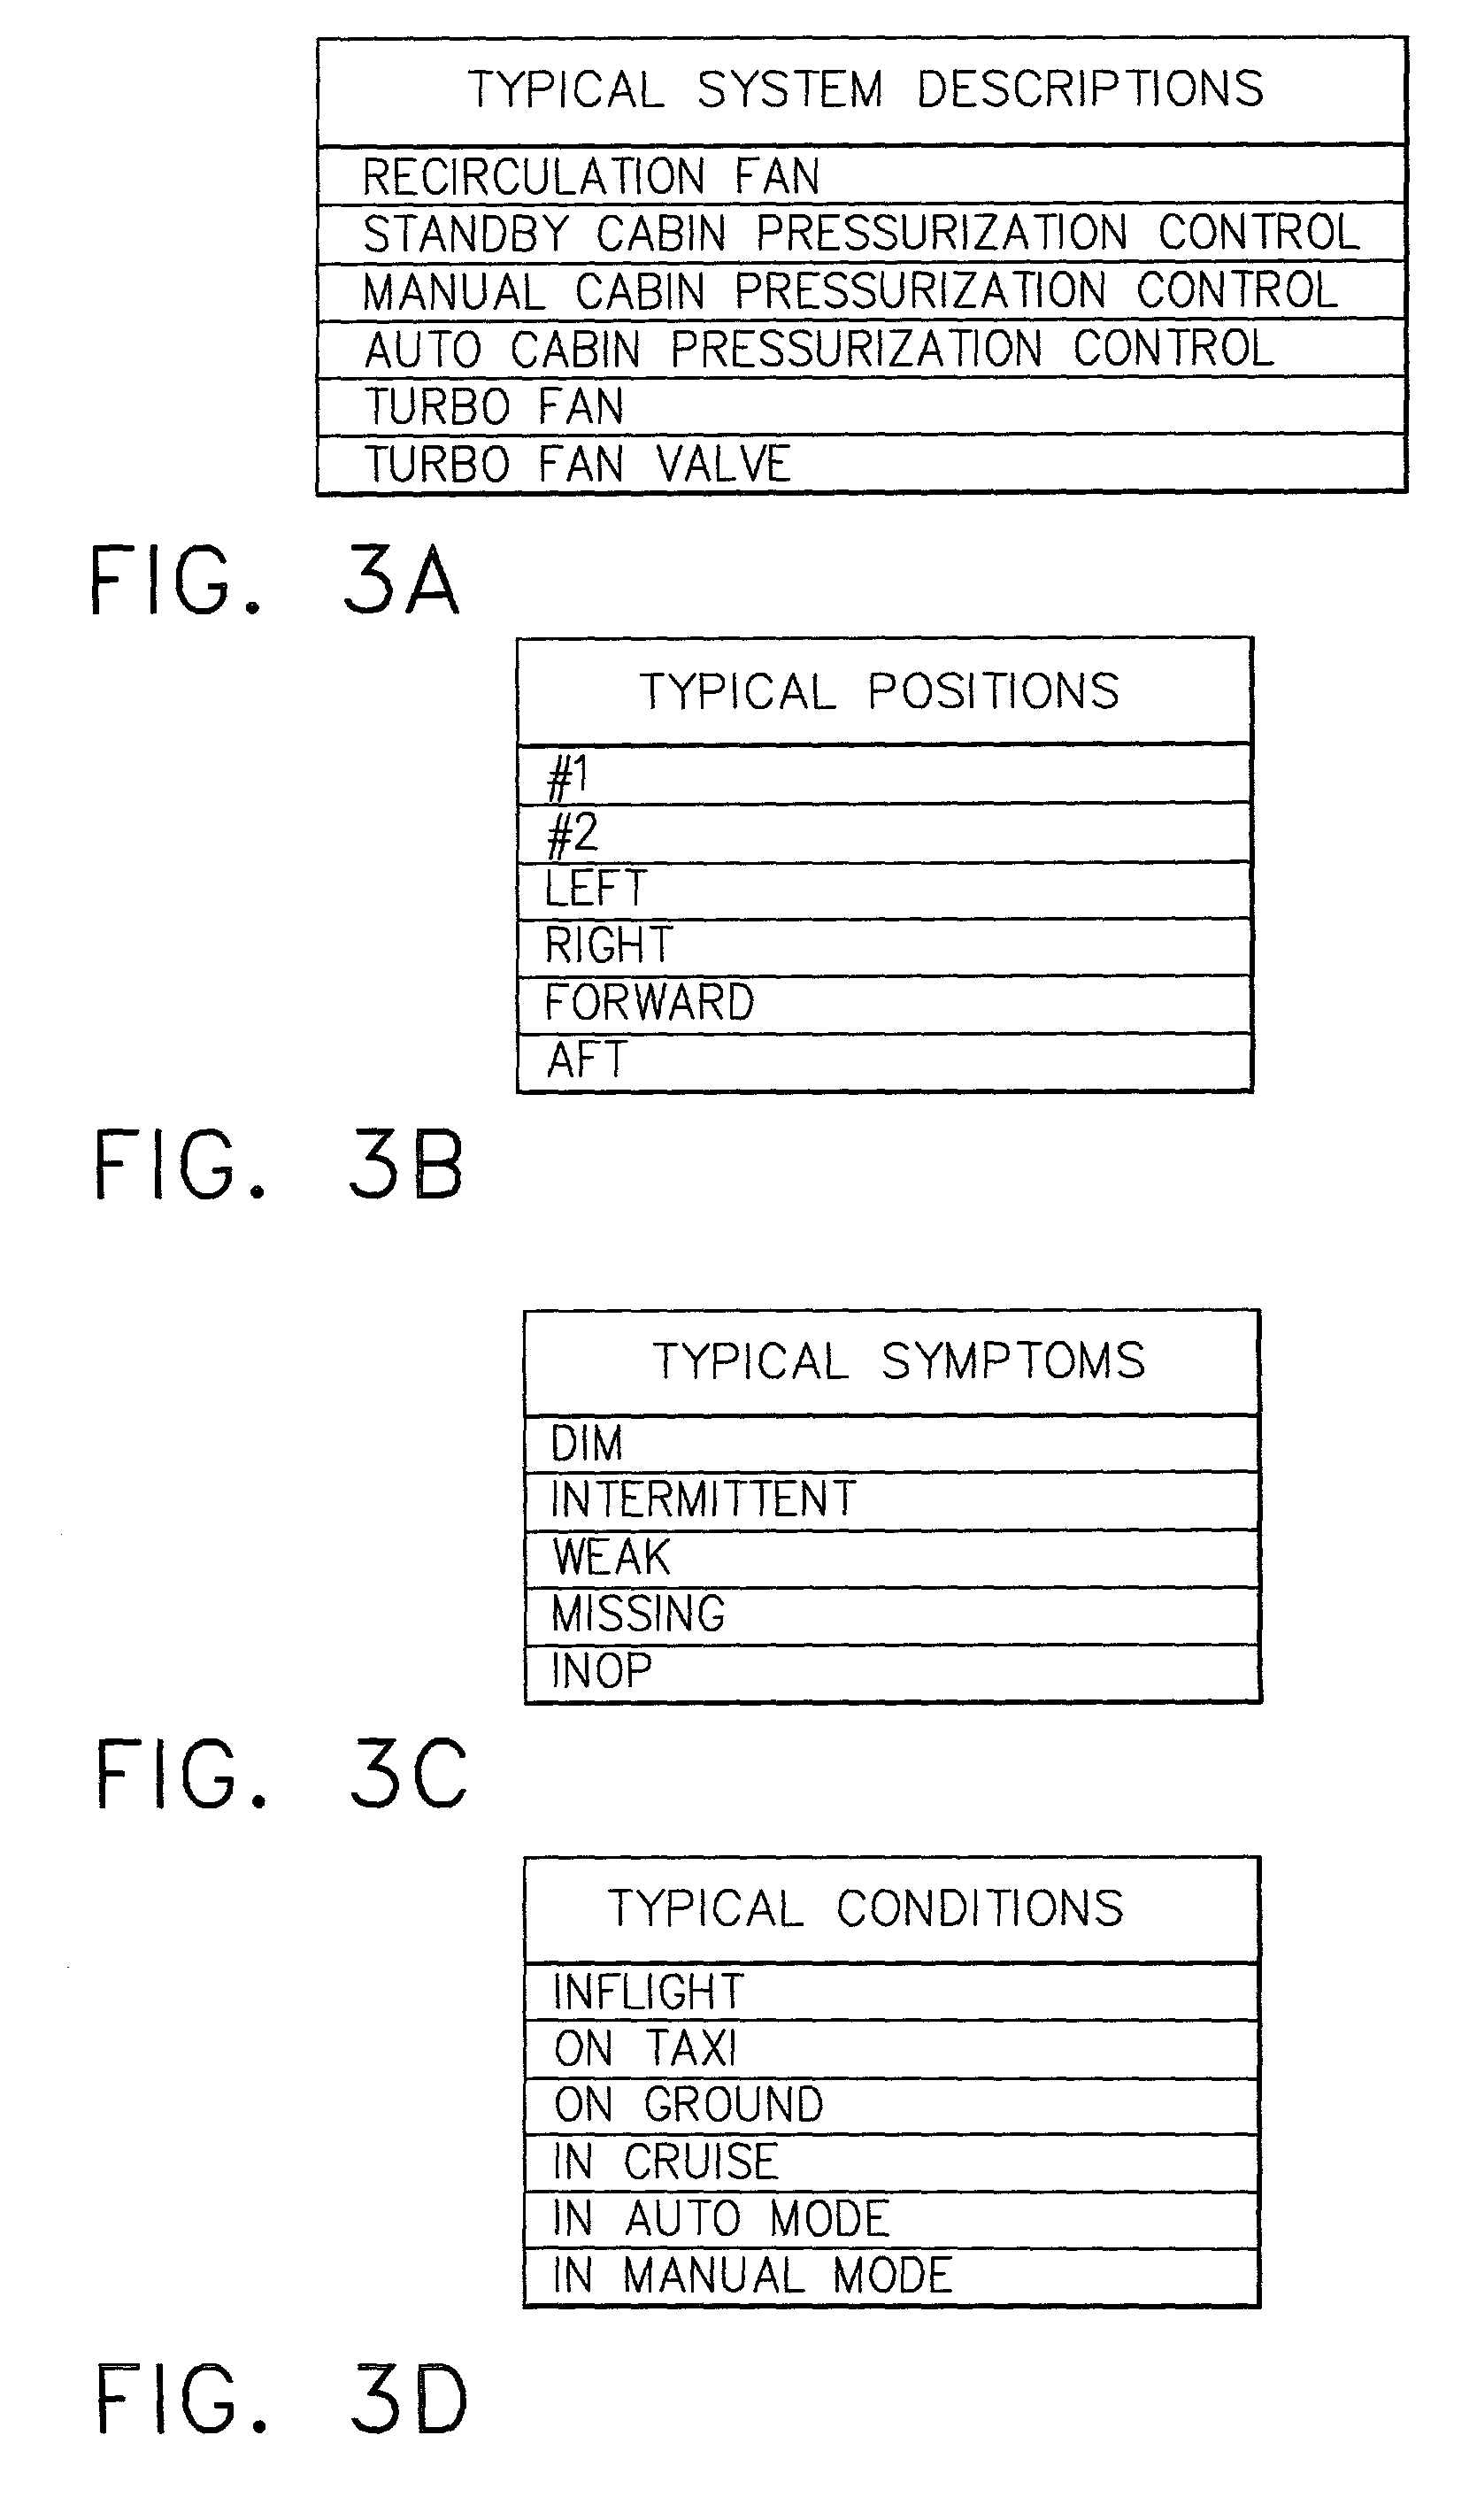 Method and apparatus for developing fault codes for complex systems based on historical data